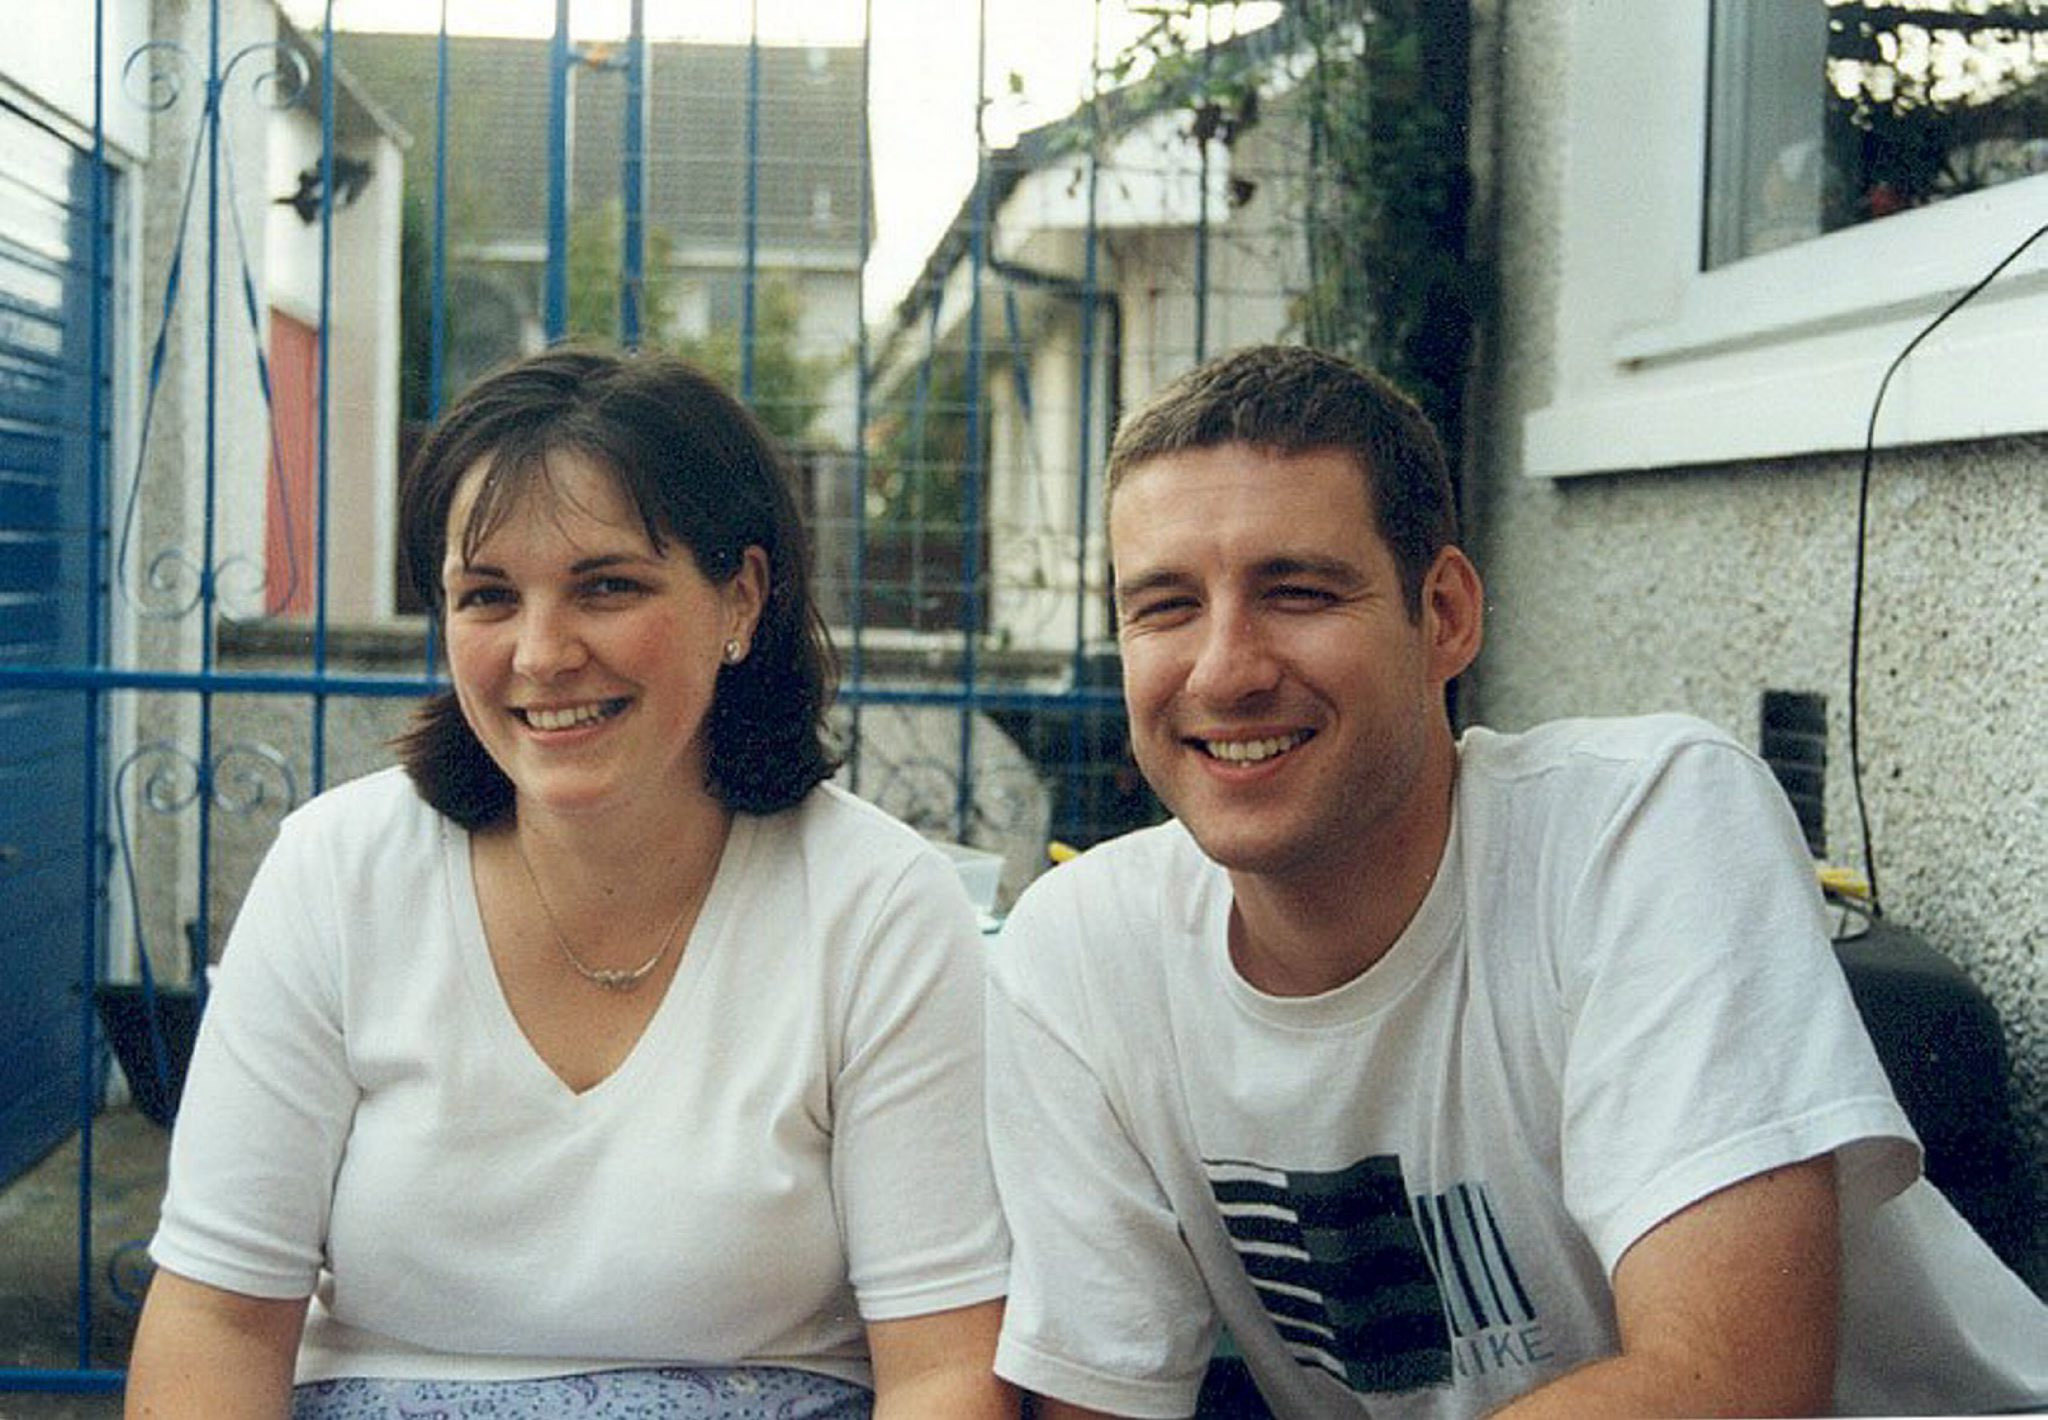 Alistair Wilson with his wife Veronica.